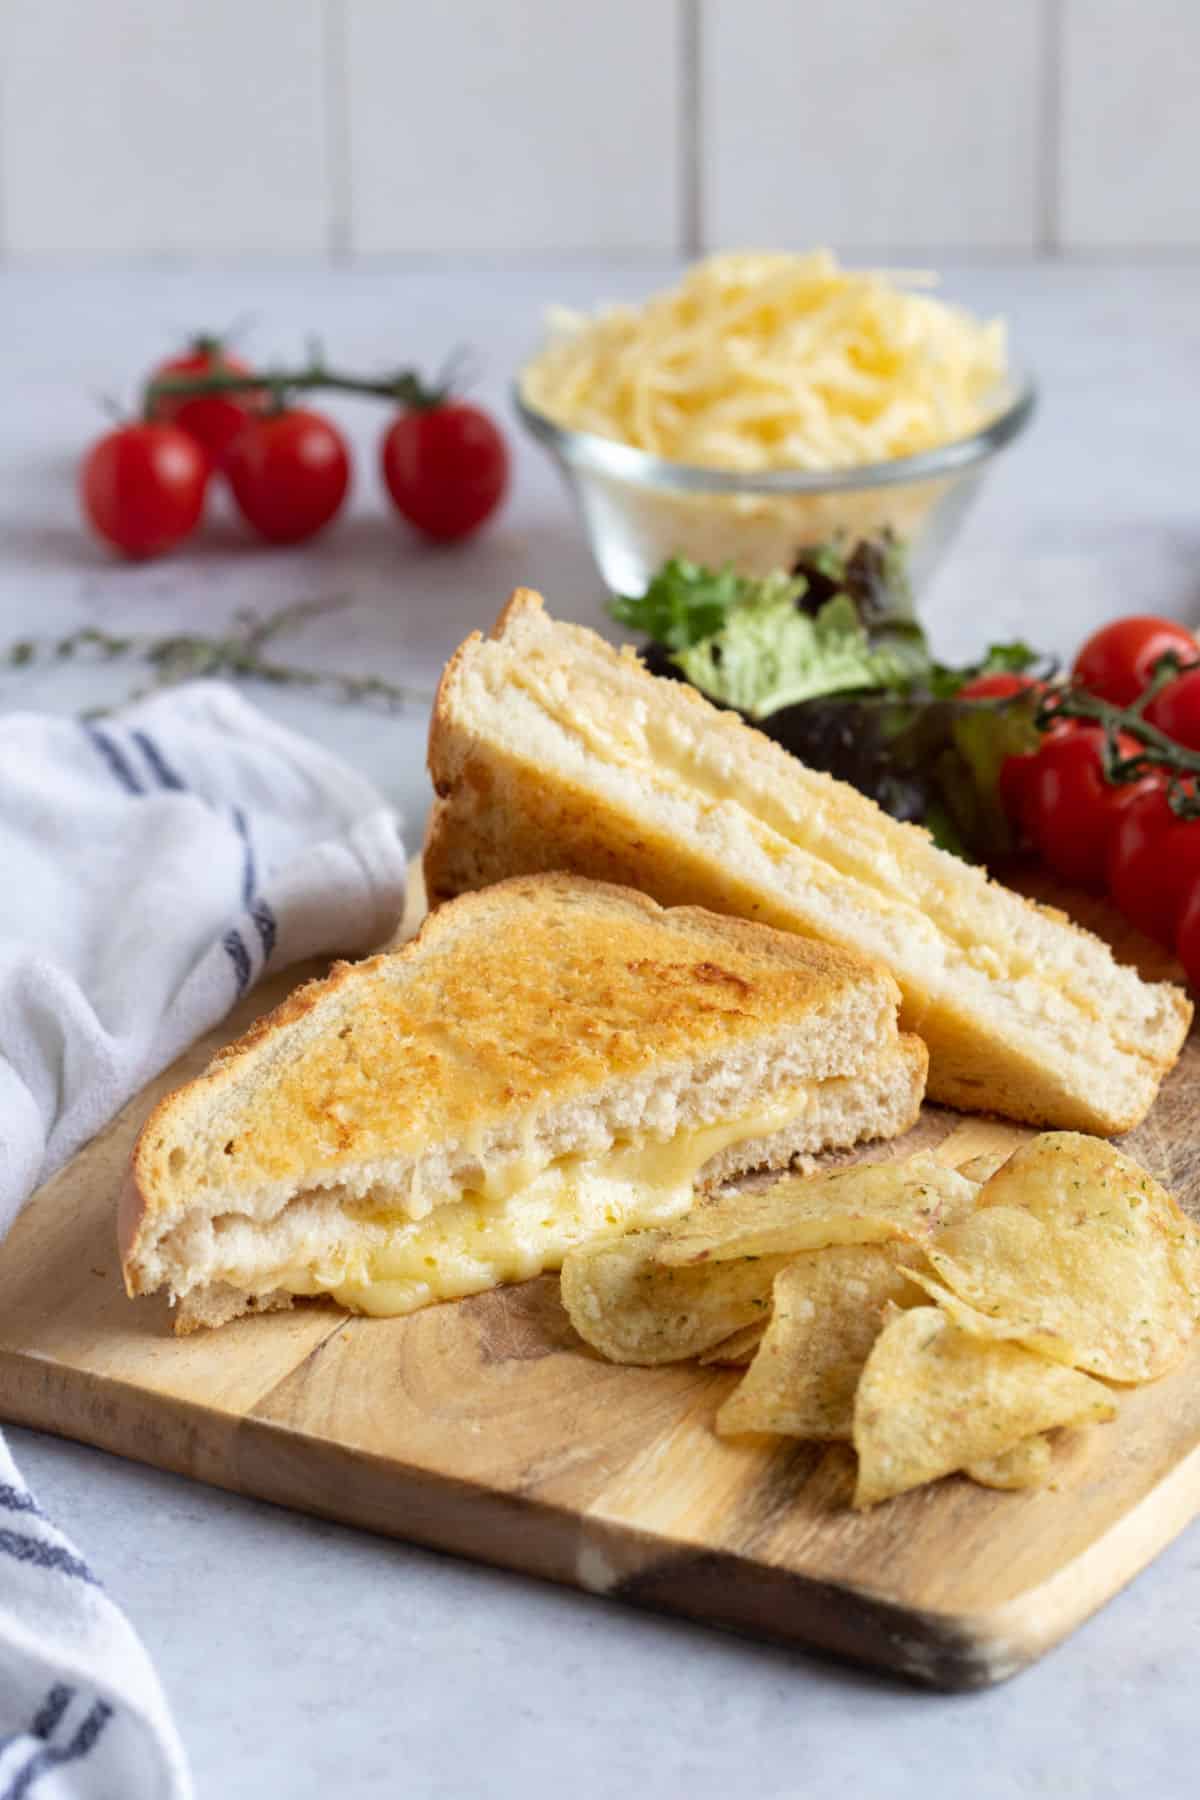 Air fryer cheese toastie with tomatoes and crisps.